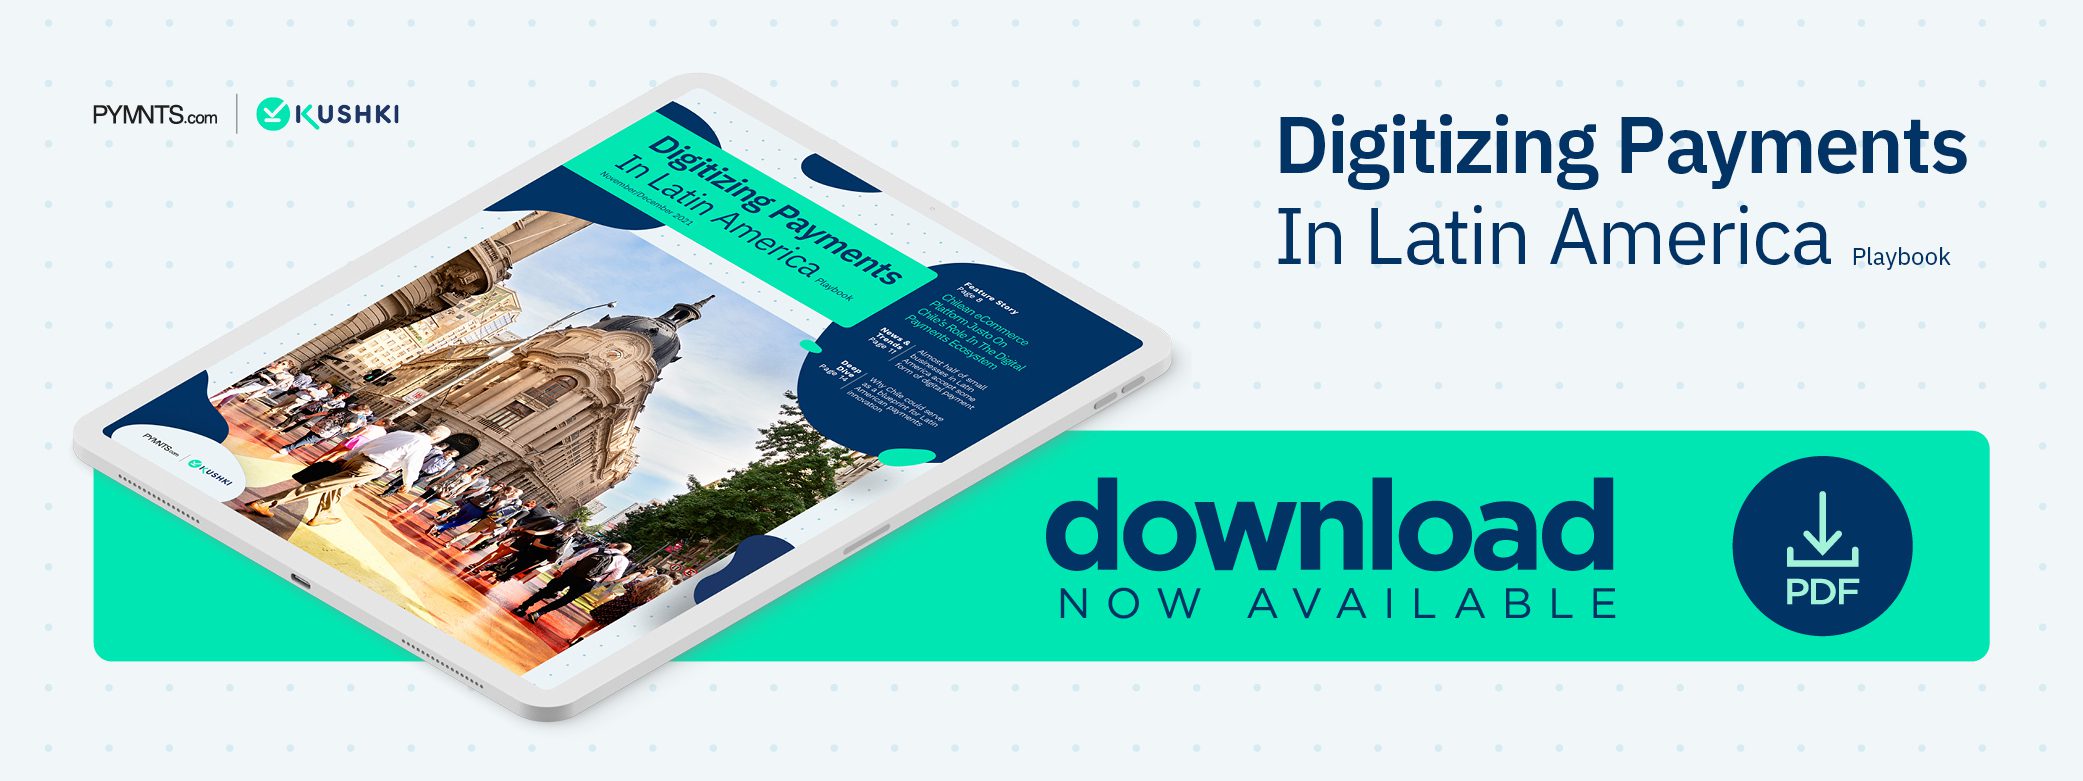 Digitizing Payments In Latin America November December 2021 - Learn why digital payments adoption in Chile serves as a blueprint for other emerging Latin American markets